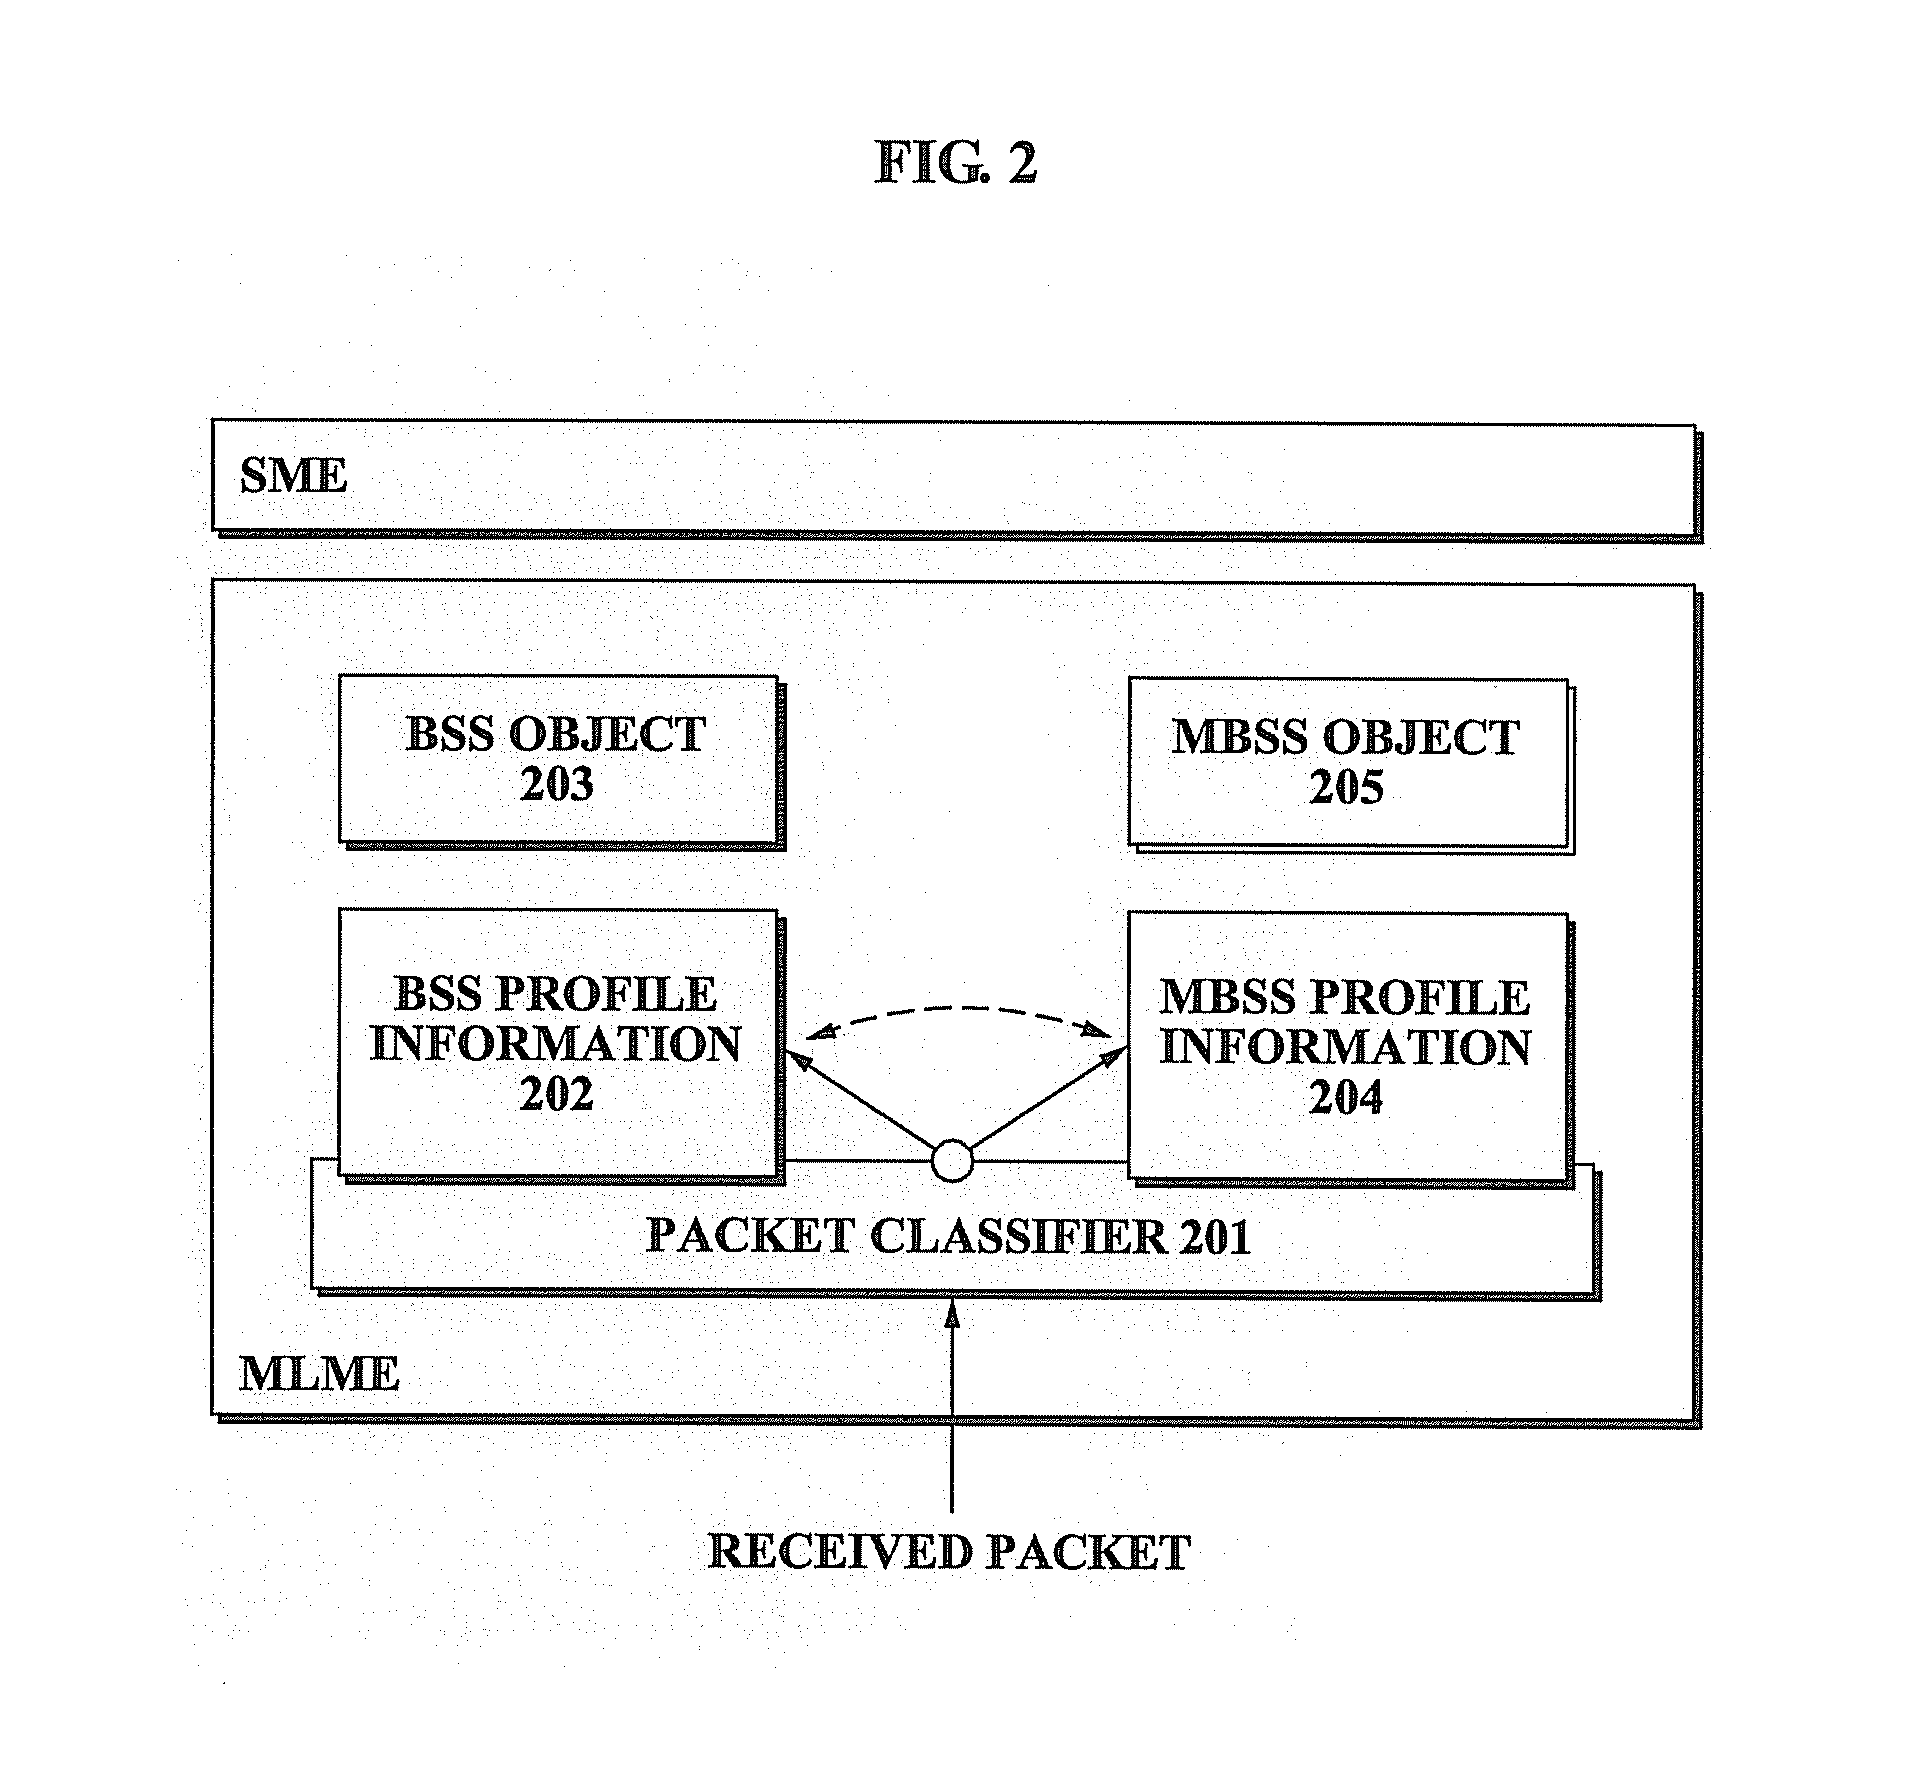 Method and system for supporting multi mesh operation modes using single wi-fi interfacing